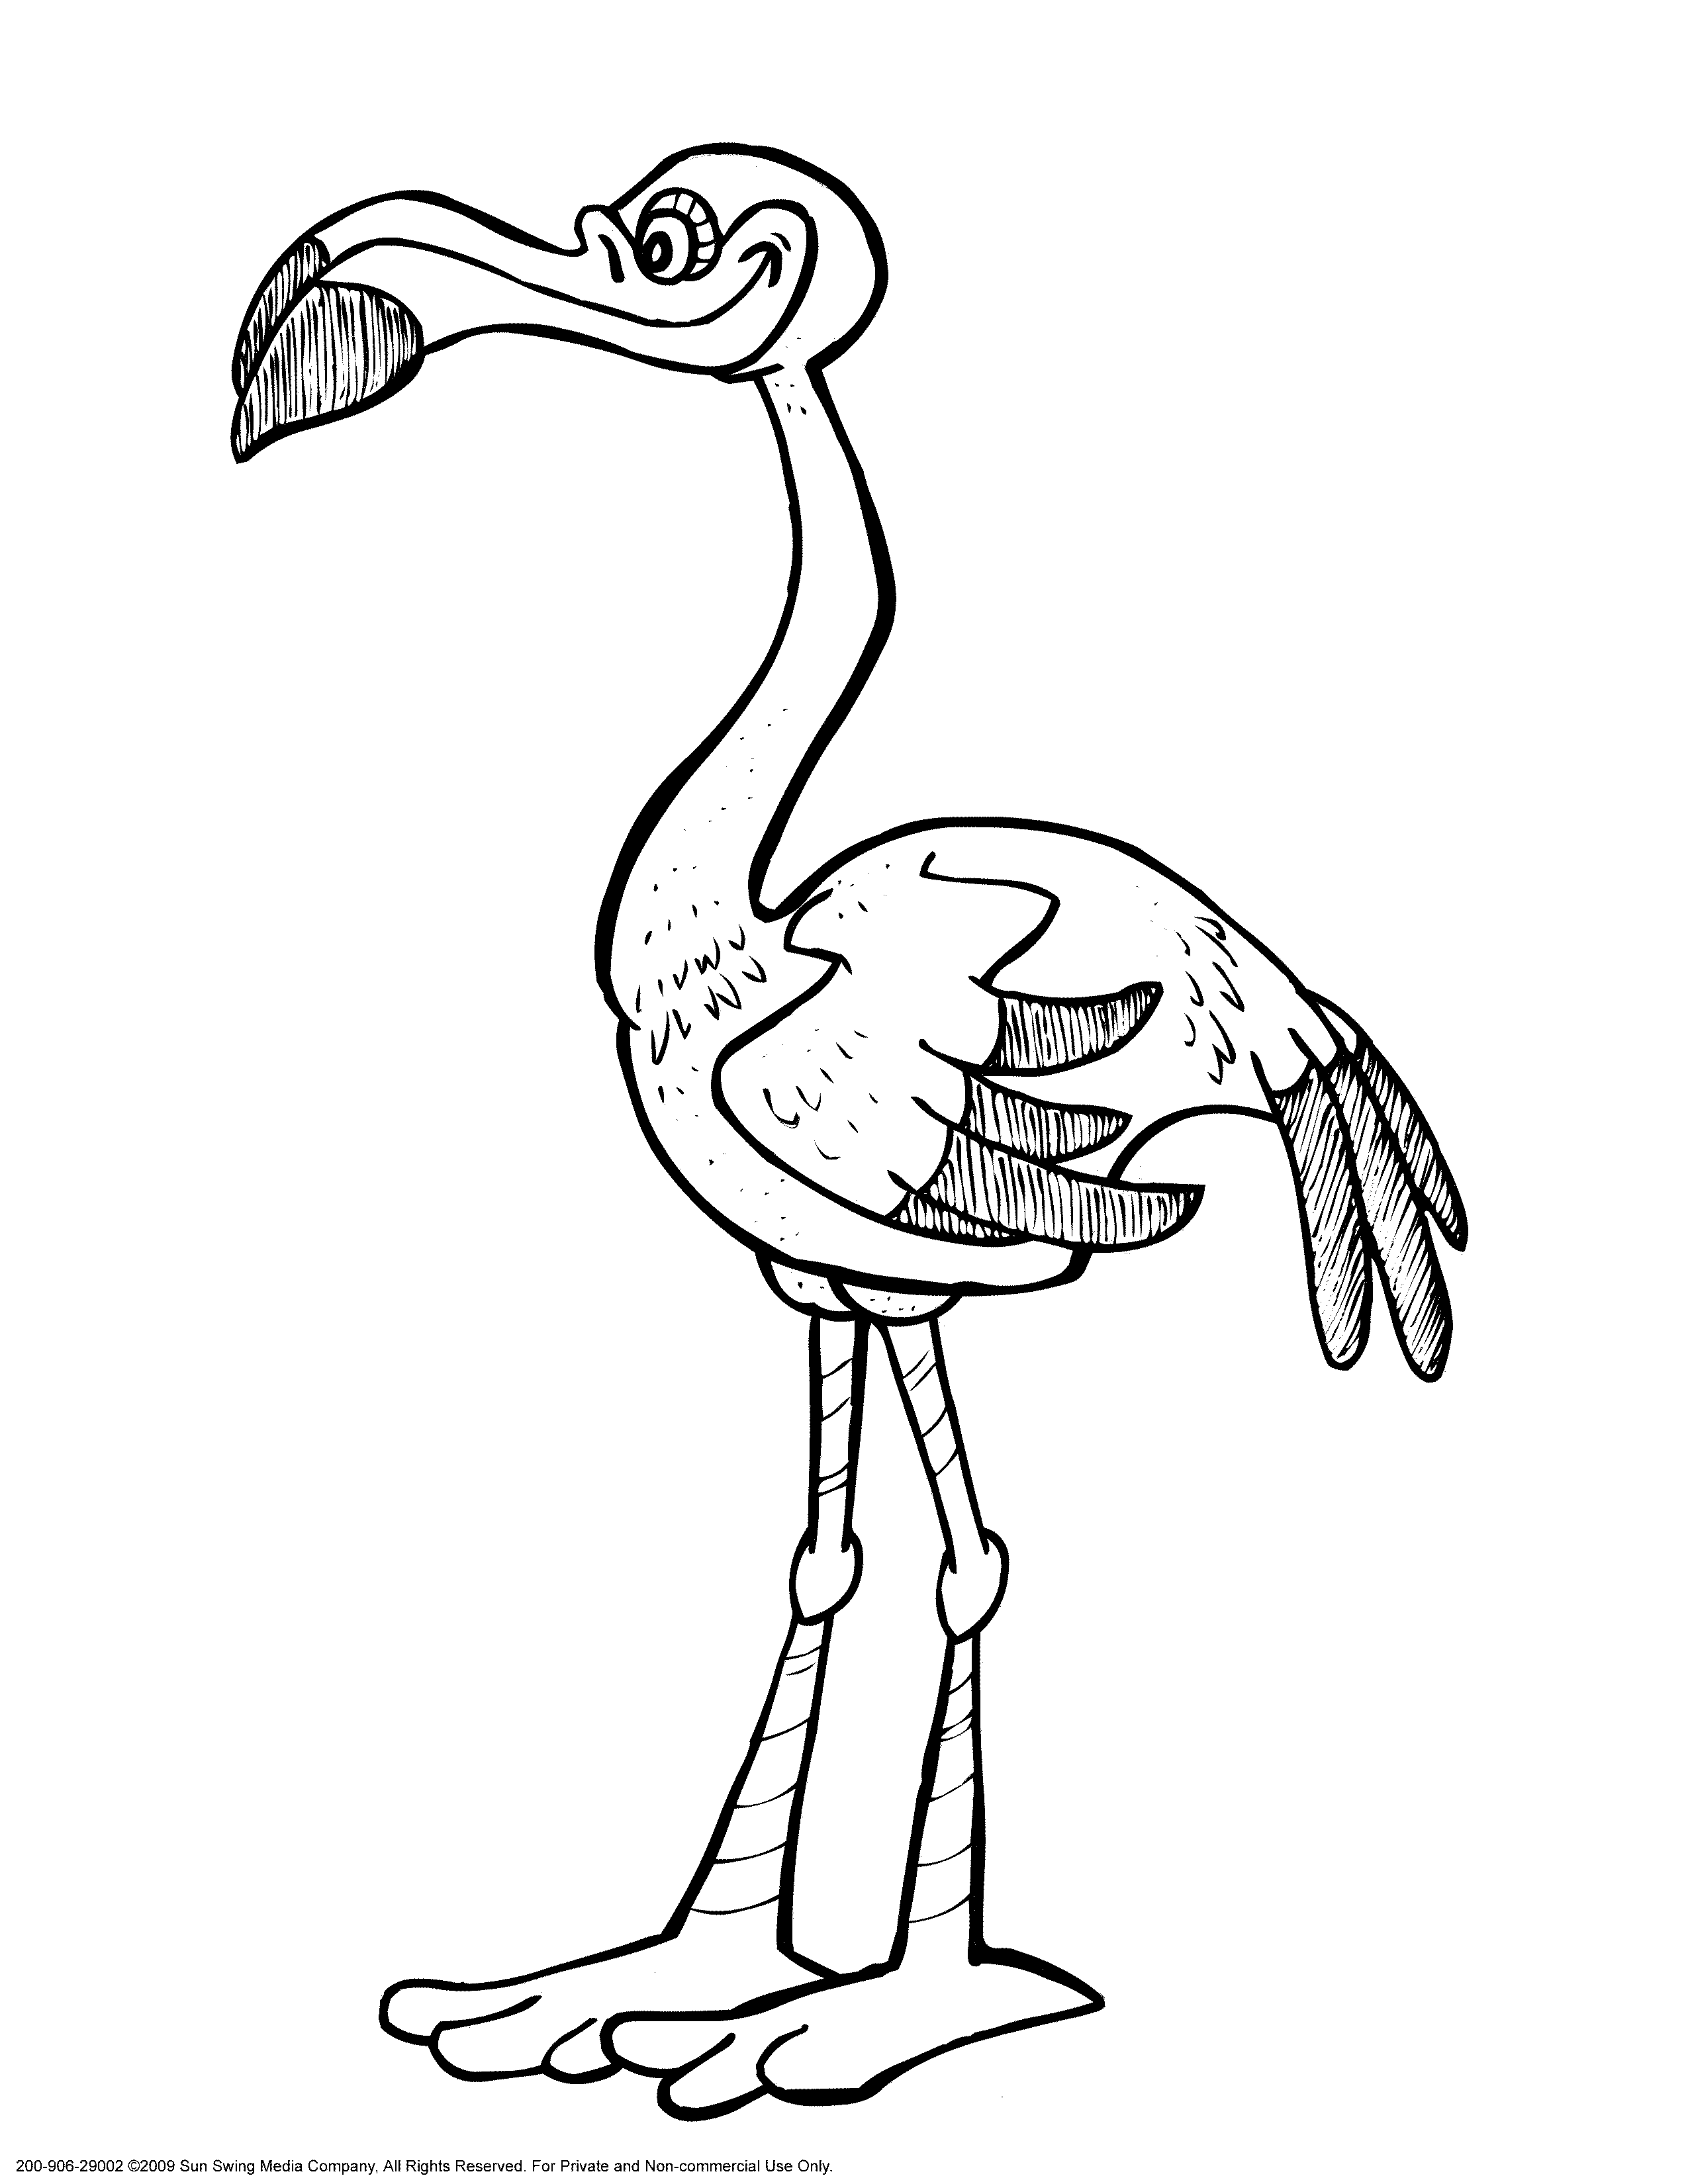 Flamingo Coloring Page Coloring Home